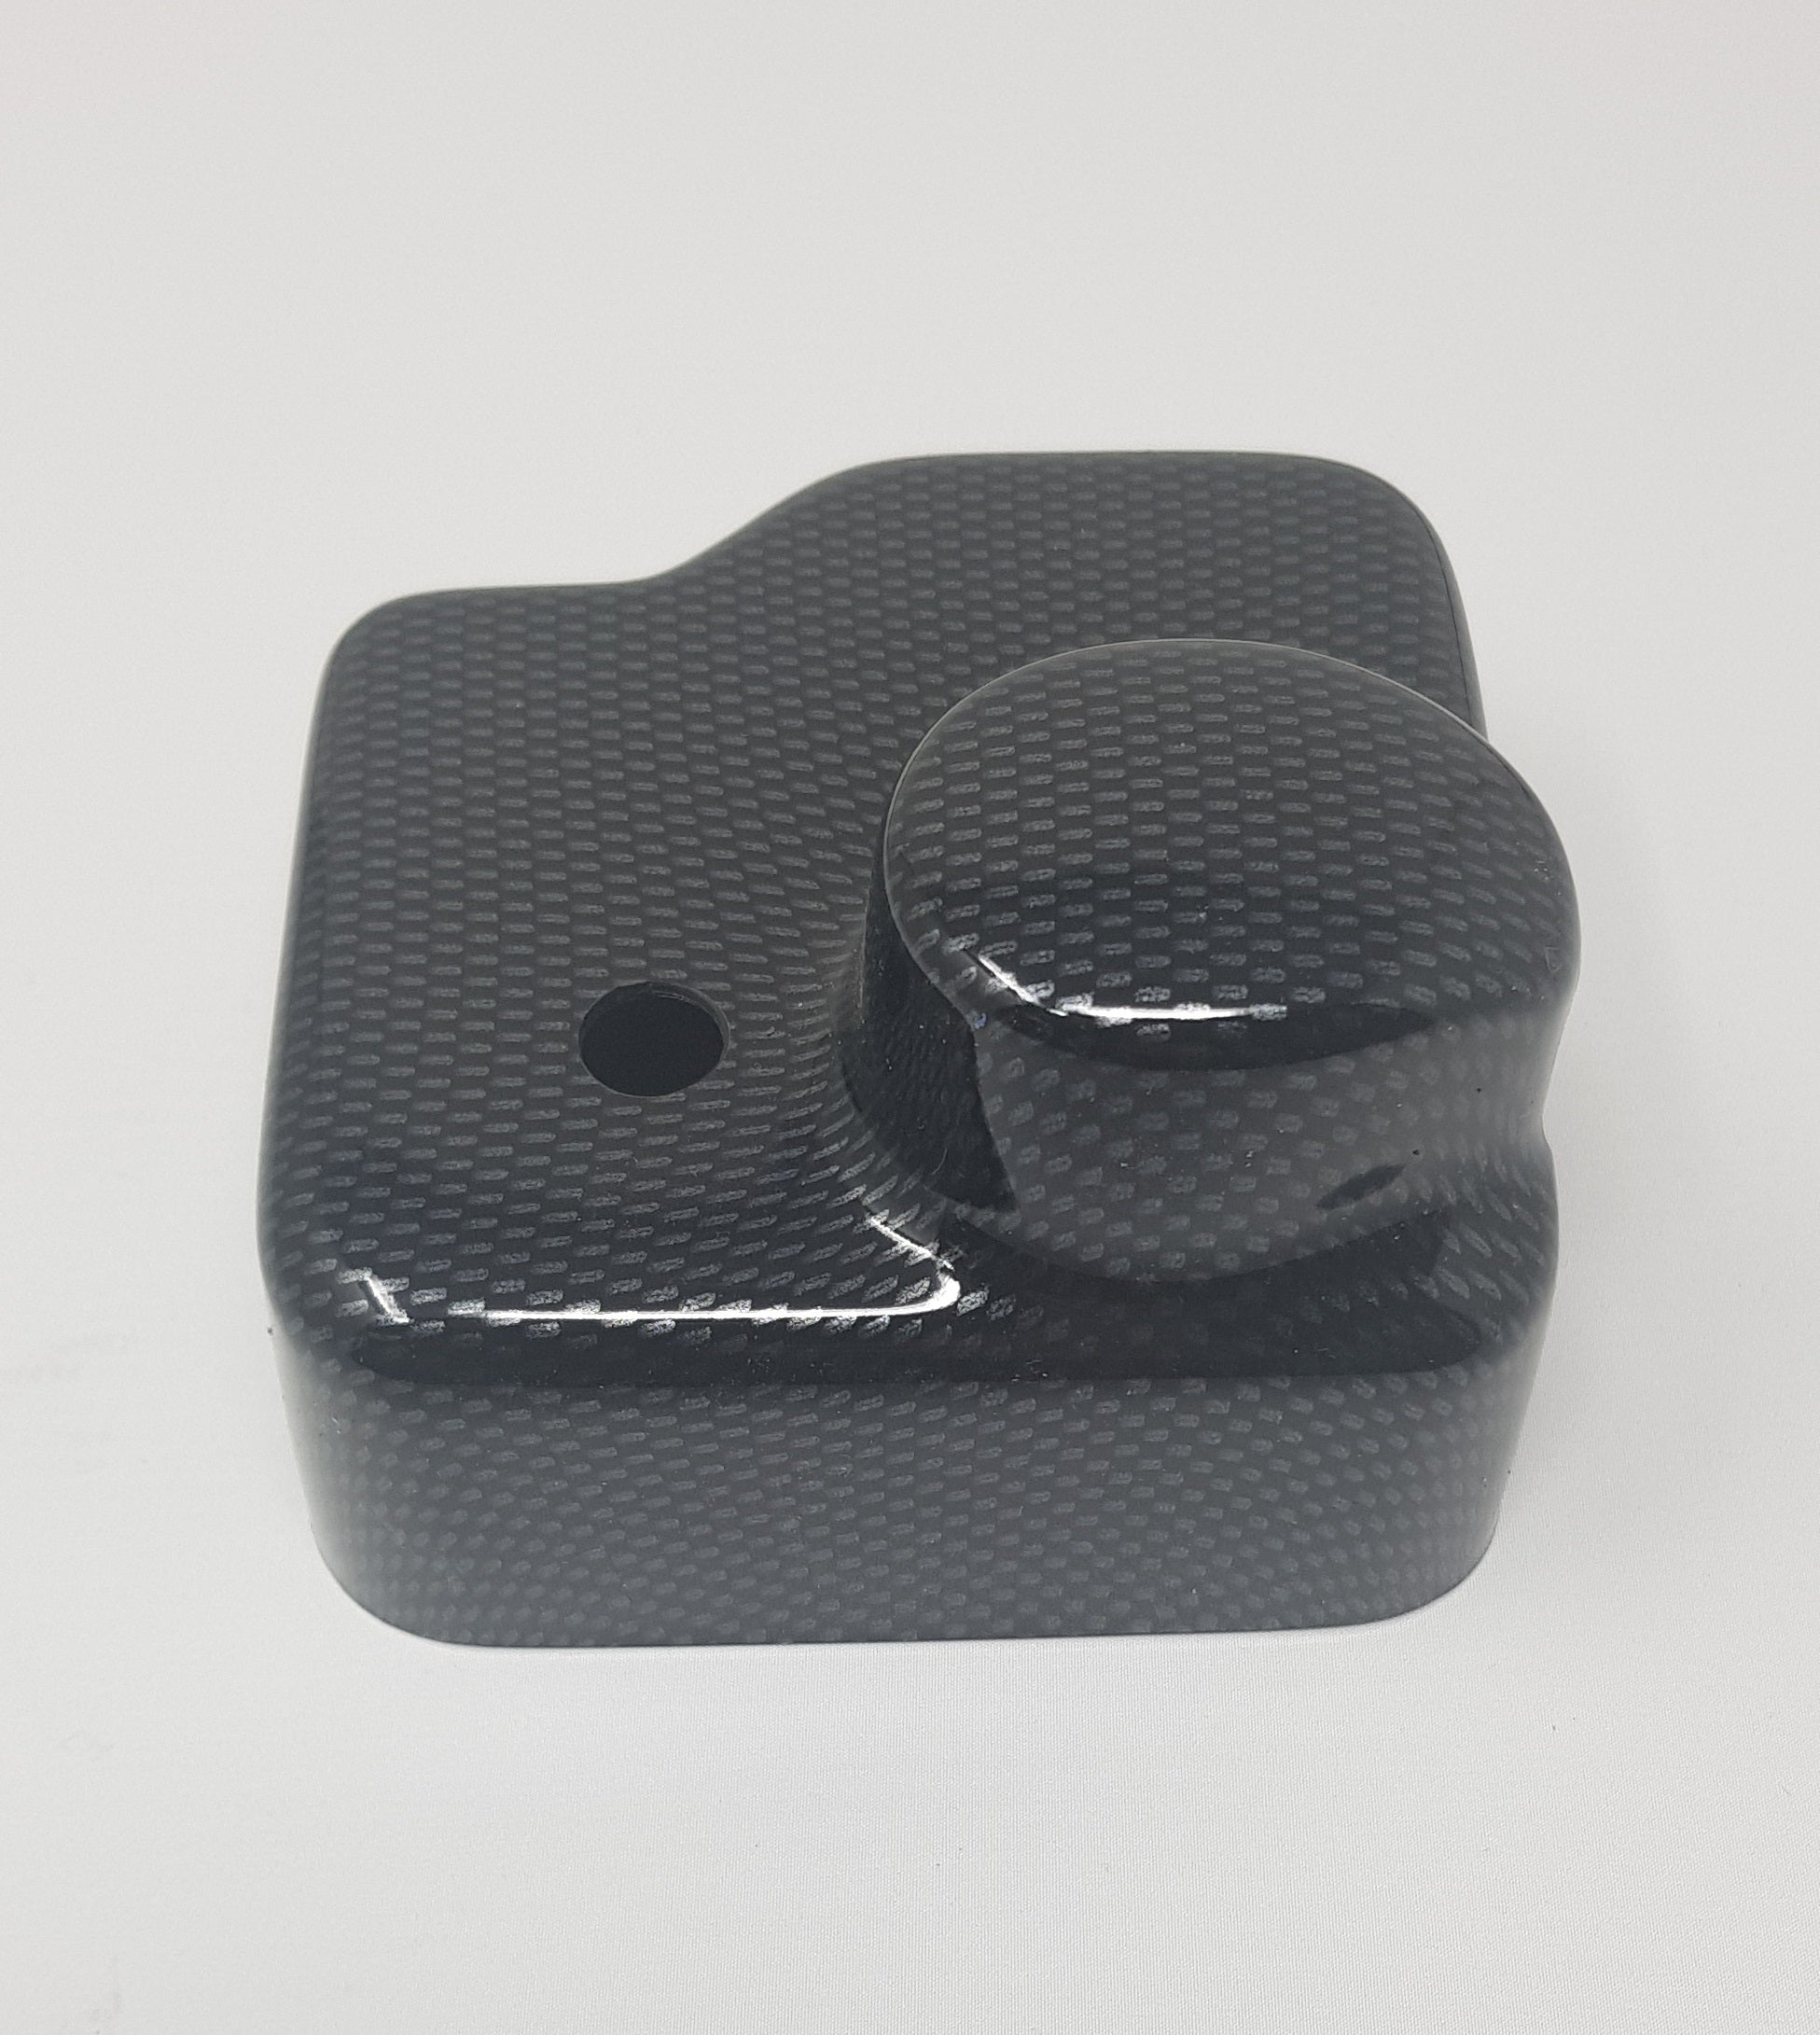 Proform Charcoal Canister Cover - Audi TT (Plastic Finishes)